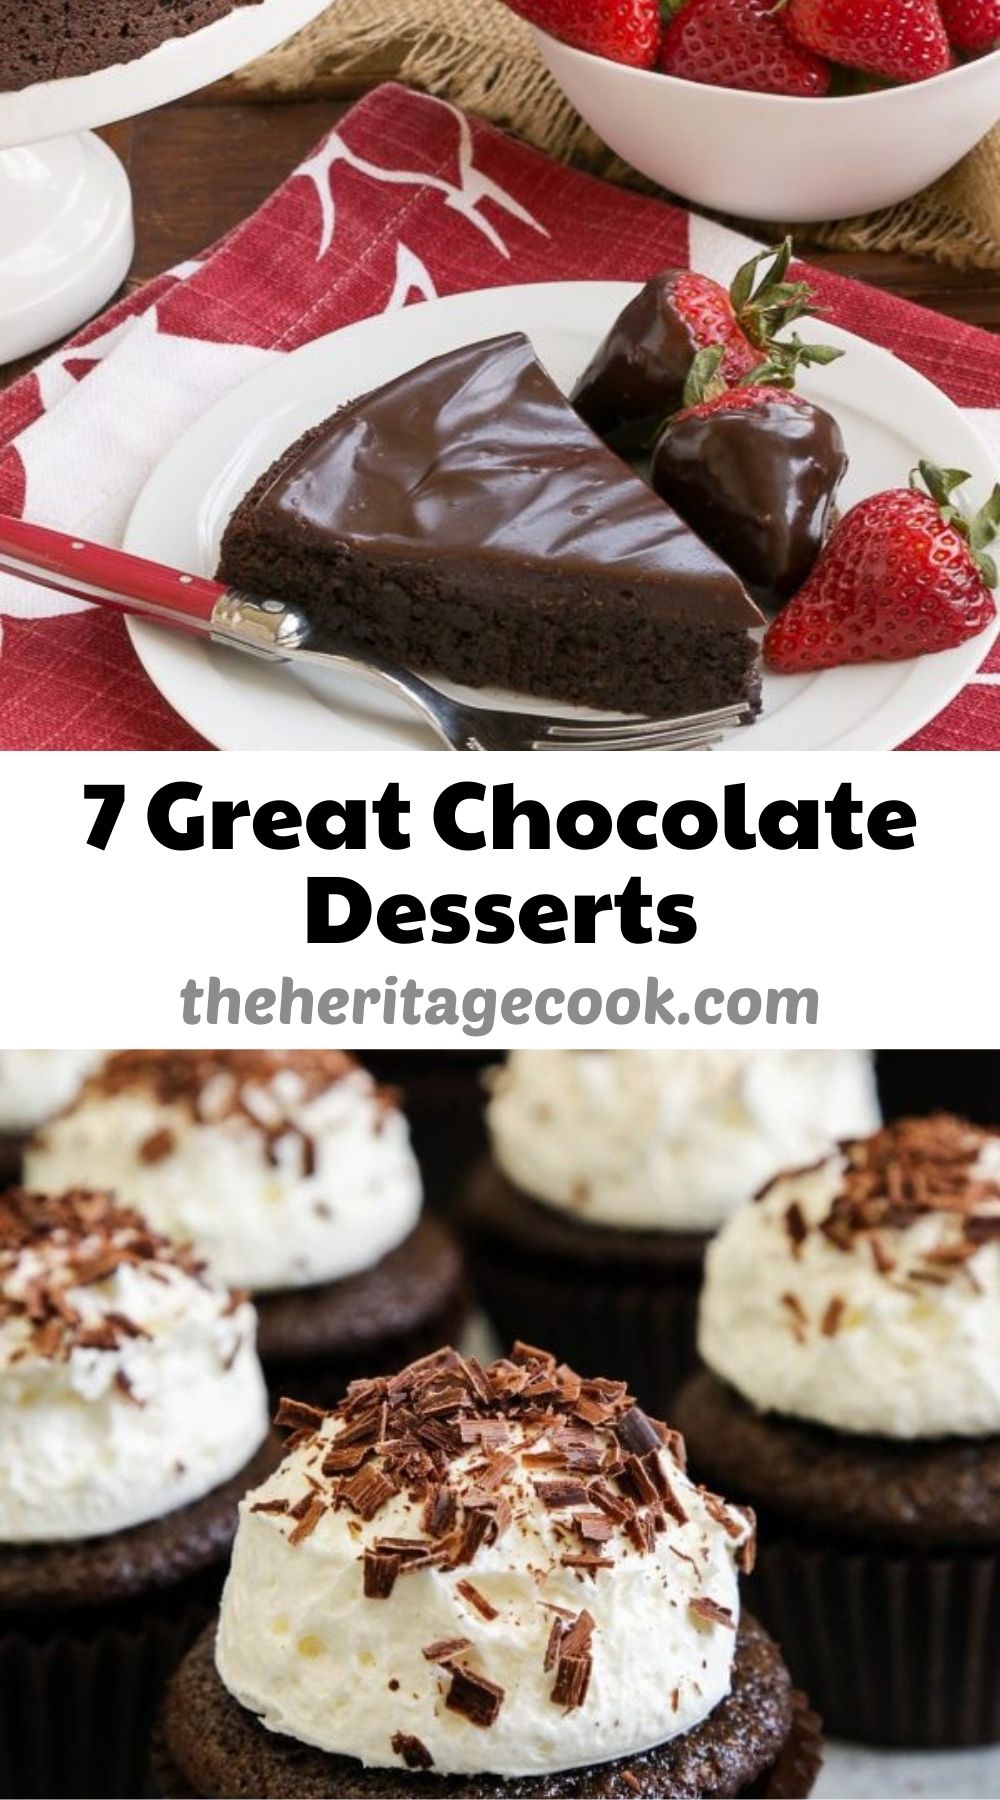 7 Great Chocolate Desserts 2021 assembled by Jane Bonacci, The Heritage Cook